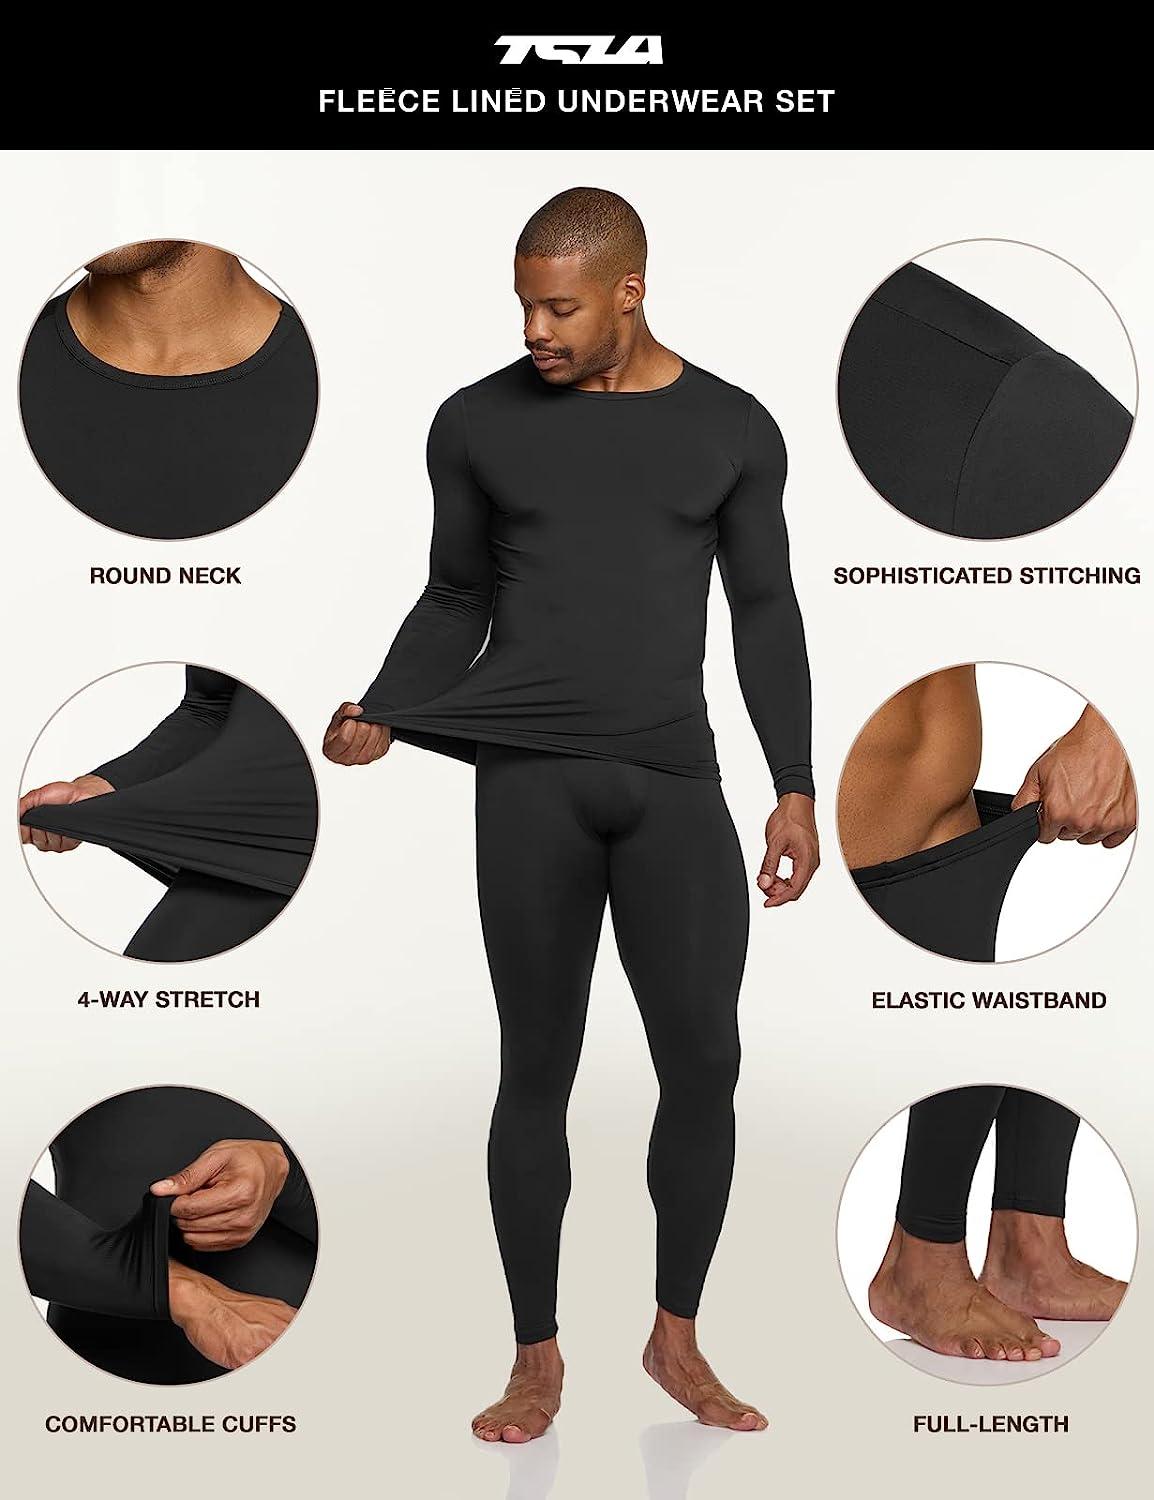 Buy Men Thermal Underwear Top by Outland; Base Layer; Soft Lightweight Warm  Fleece (Black, 4X-Large) at